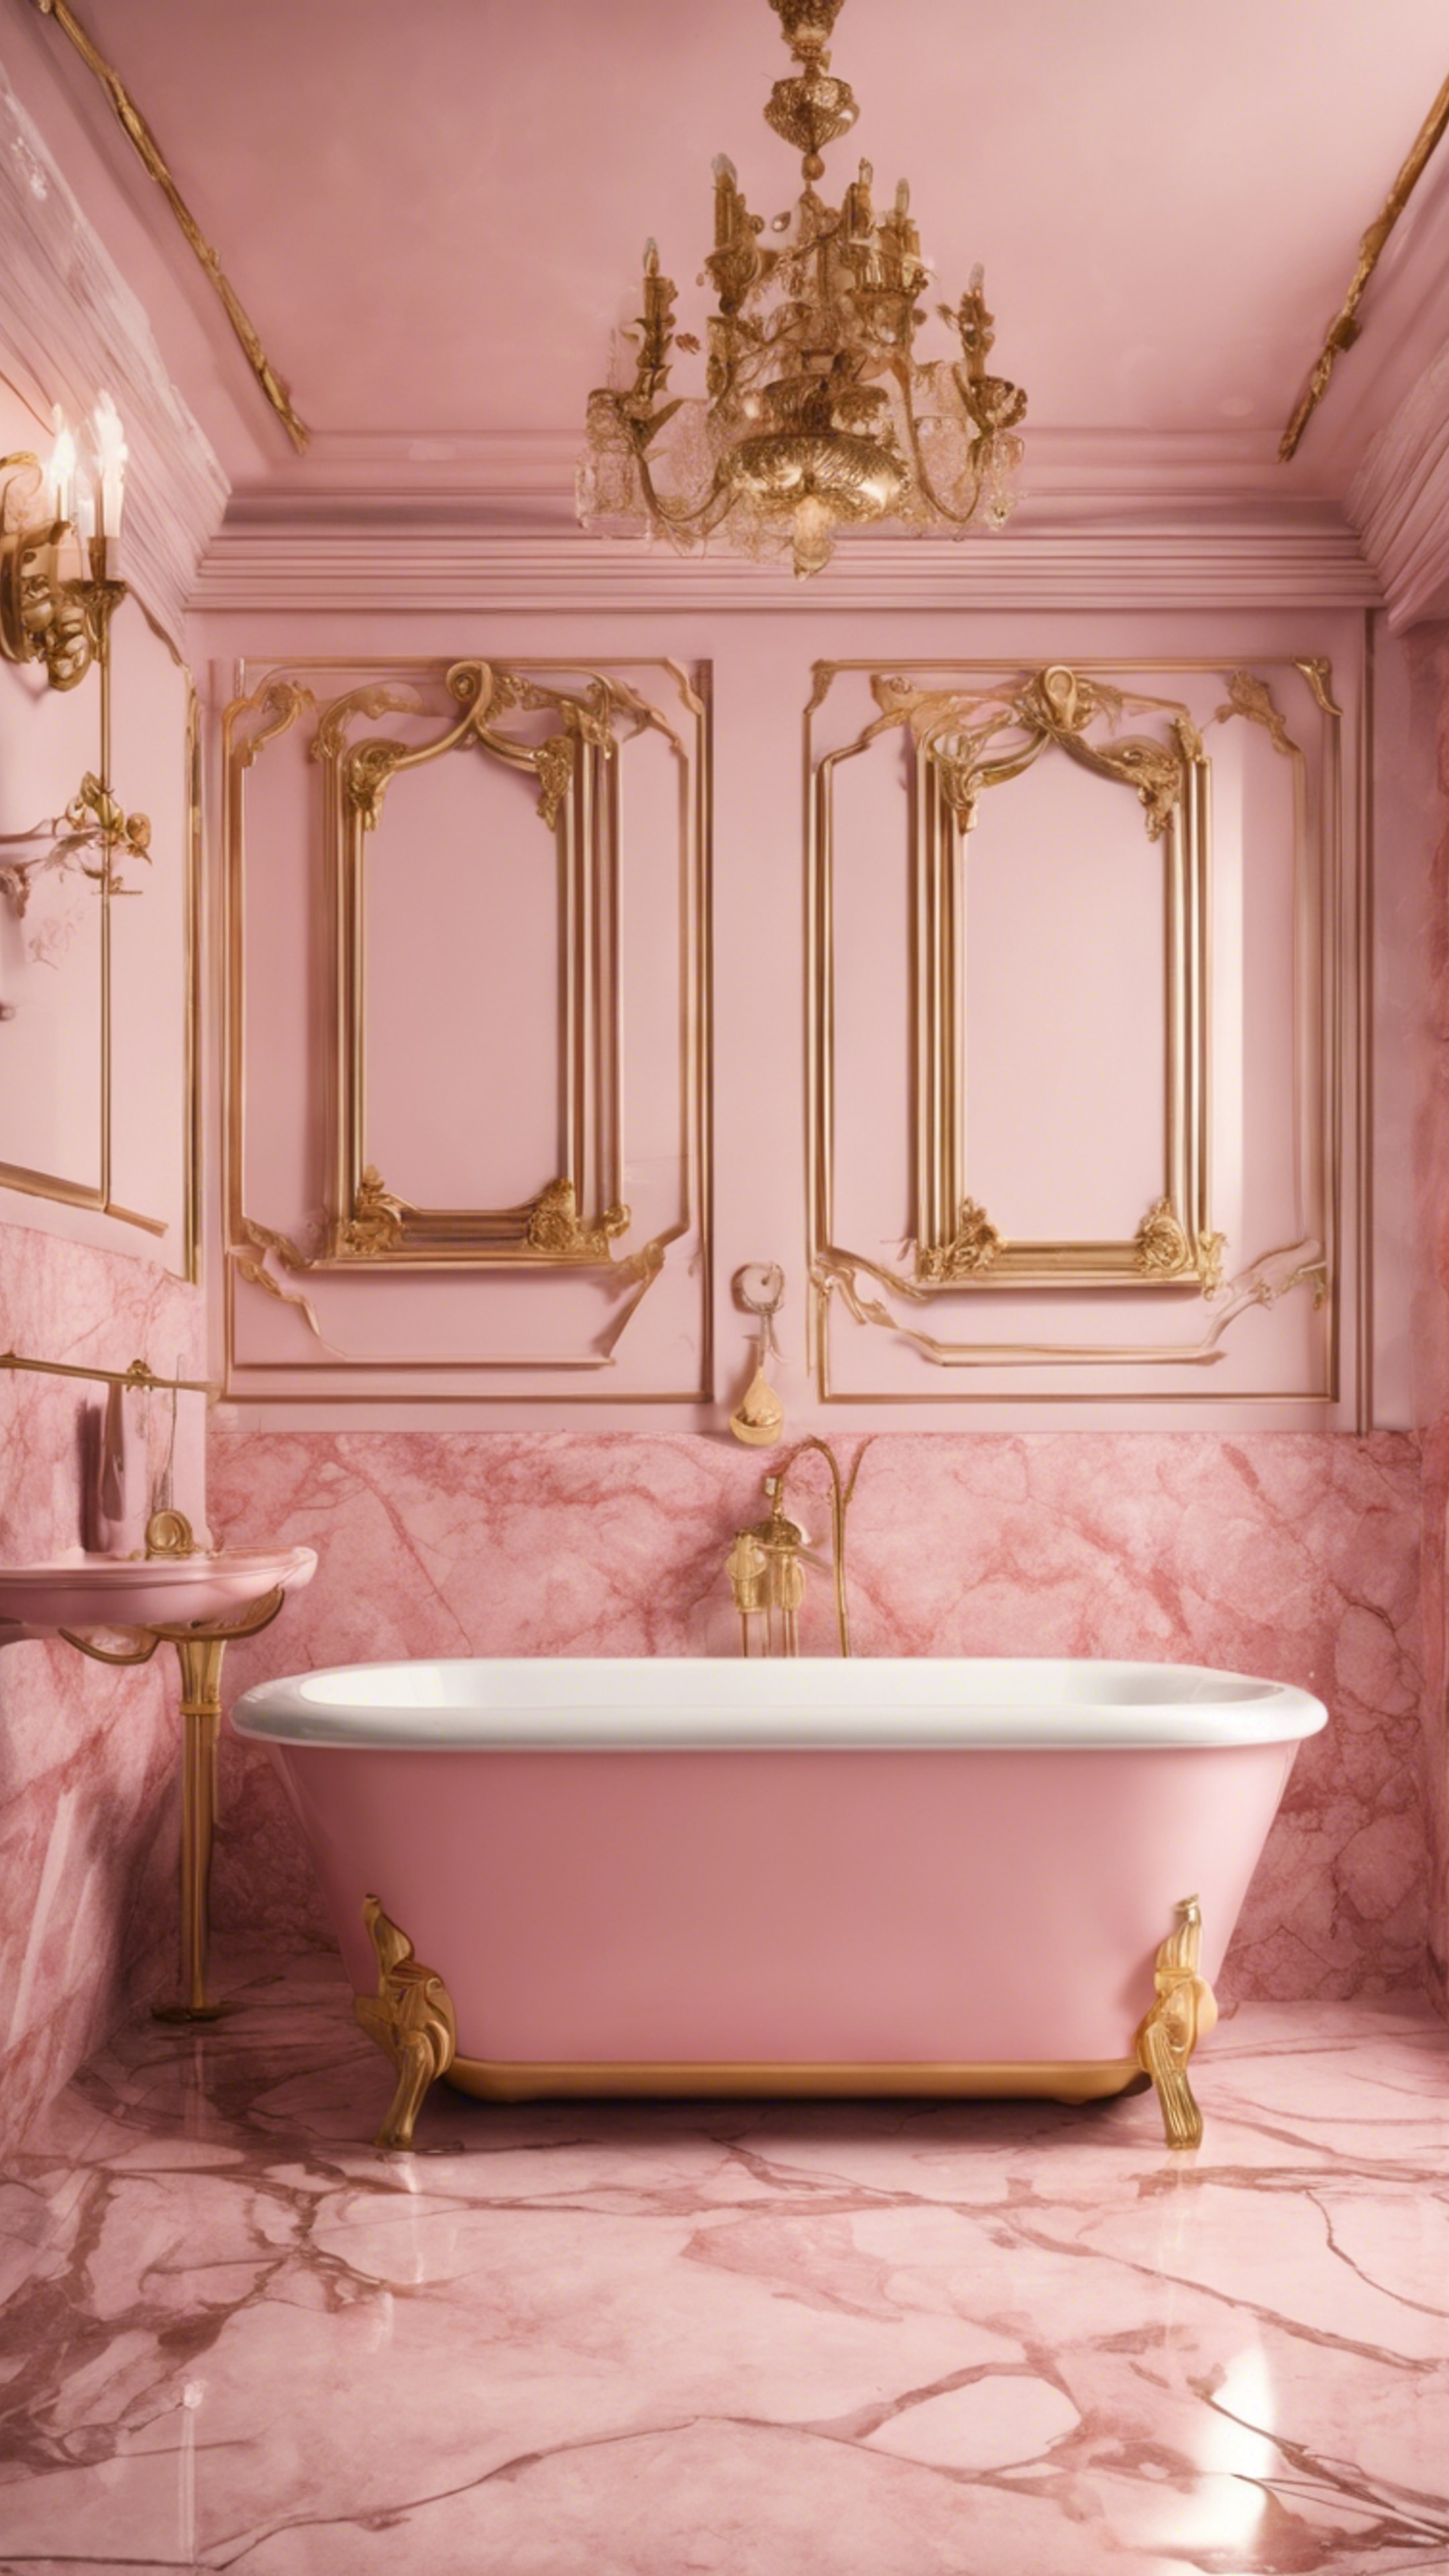 A pink marble bathroom with brass fixtures in a vintage style house. Wallpaper[1fdd413f8aae4404a474]